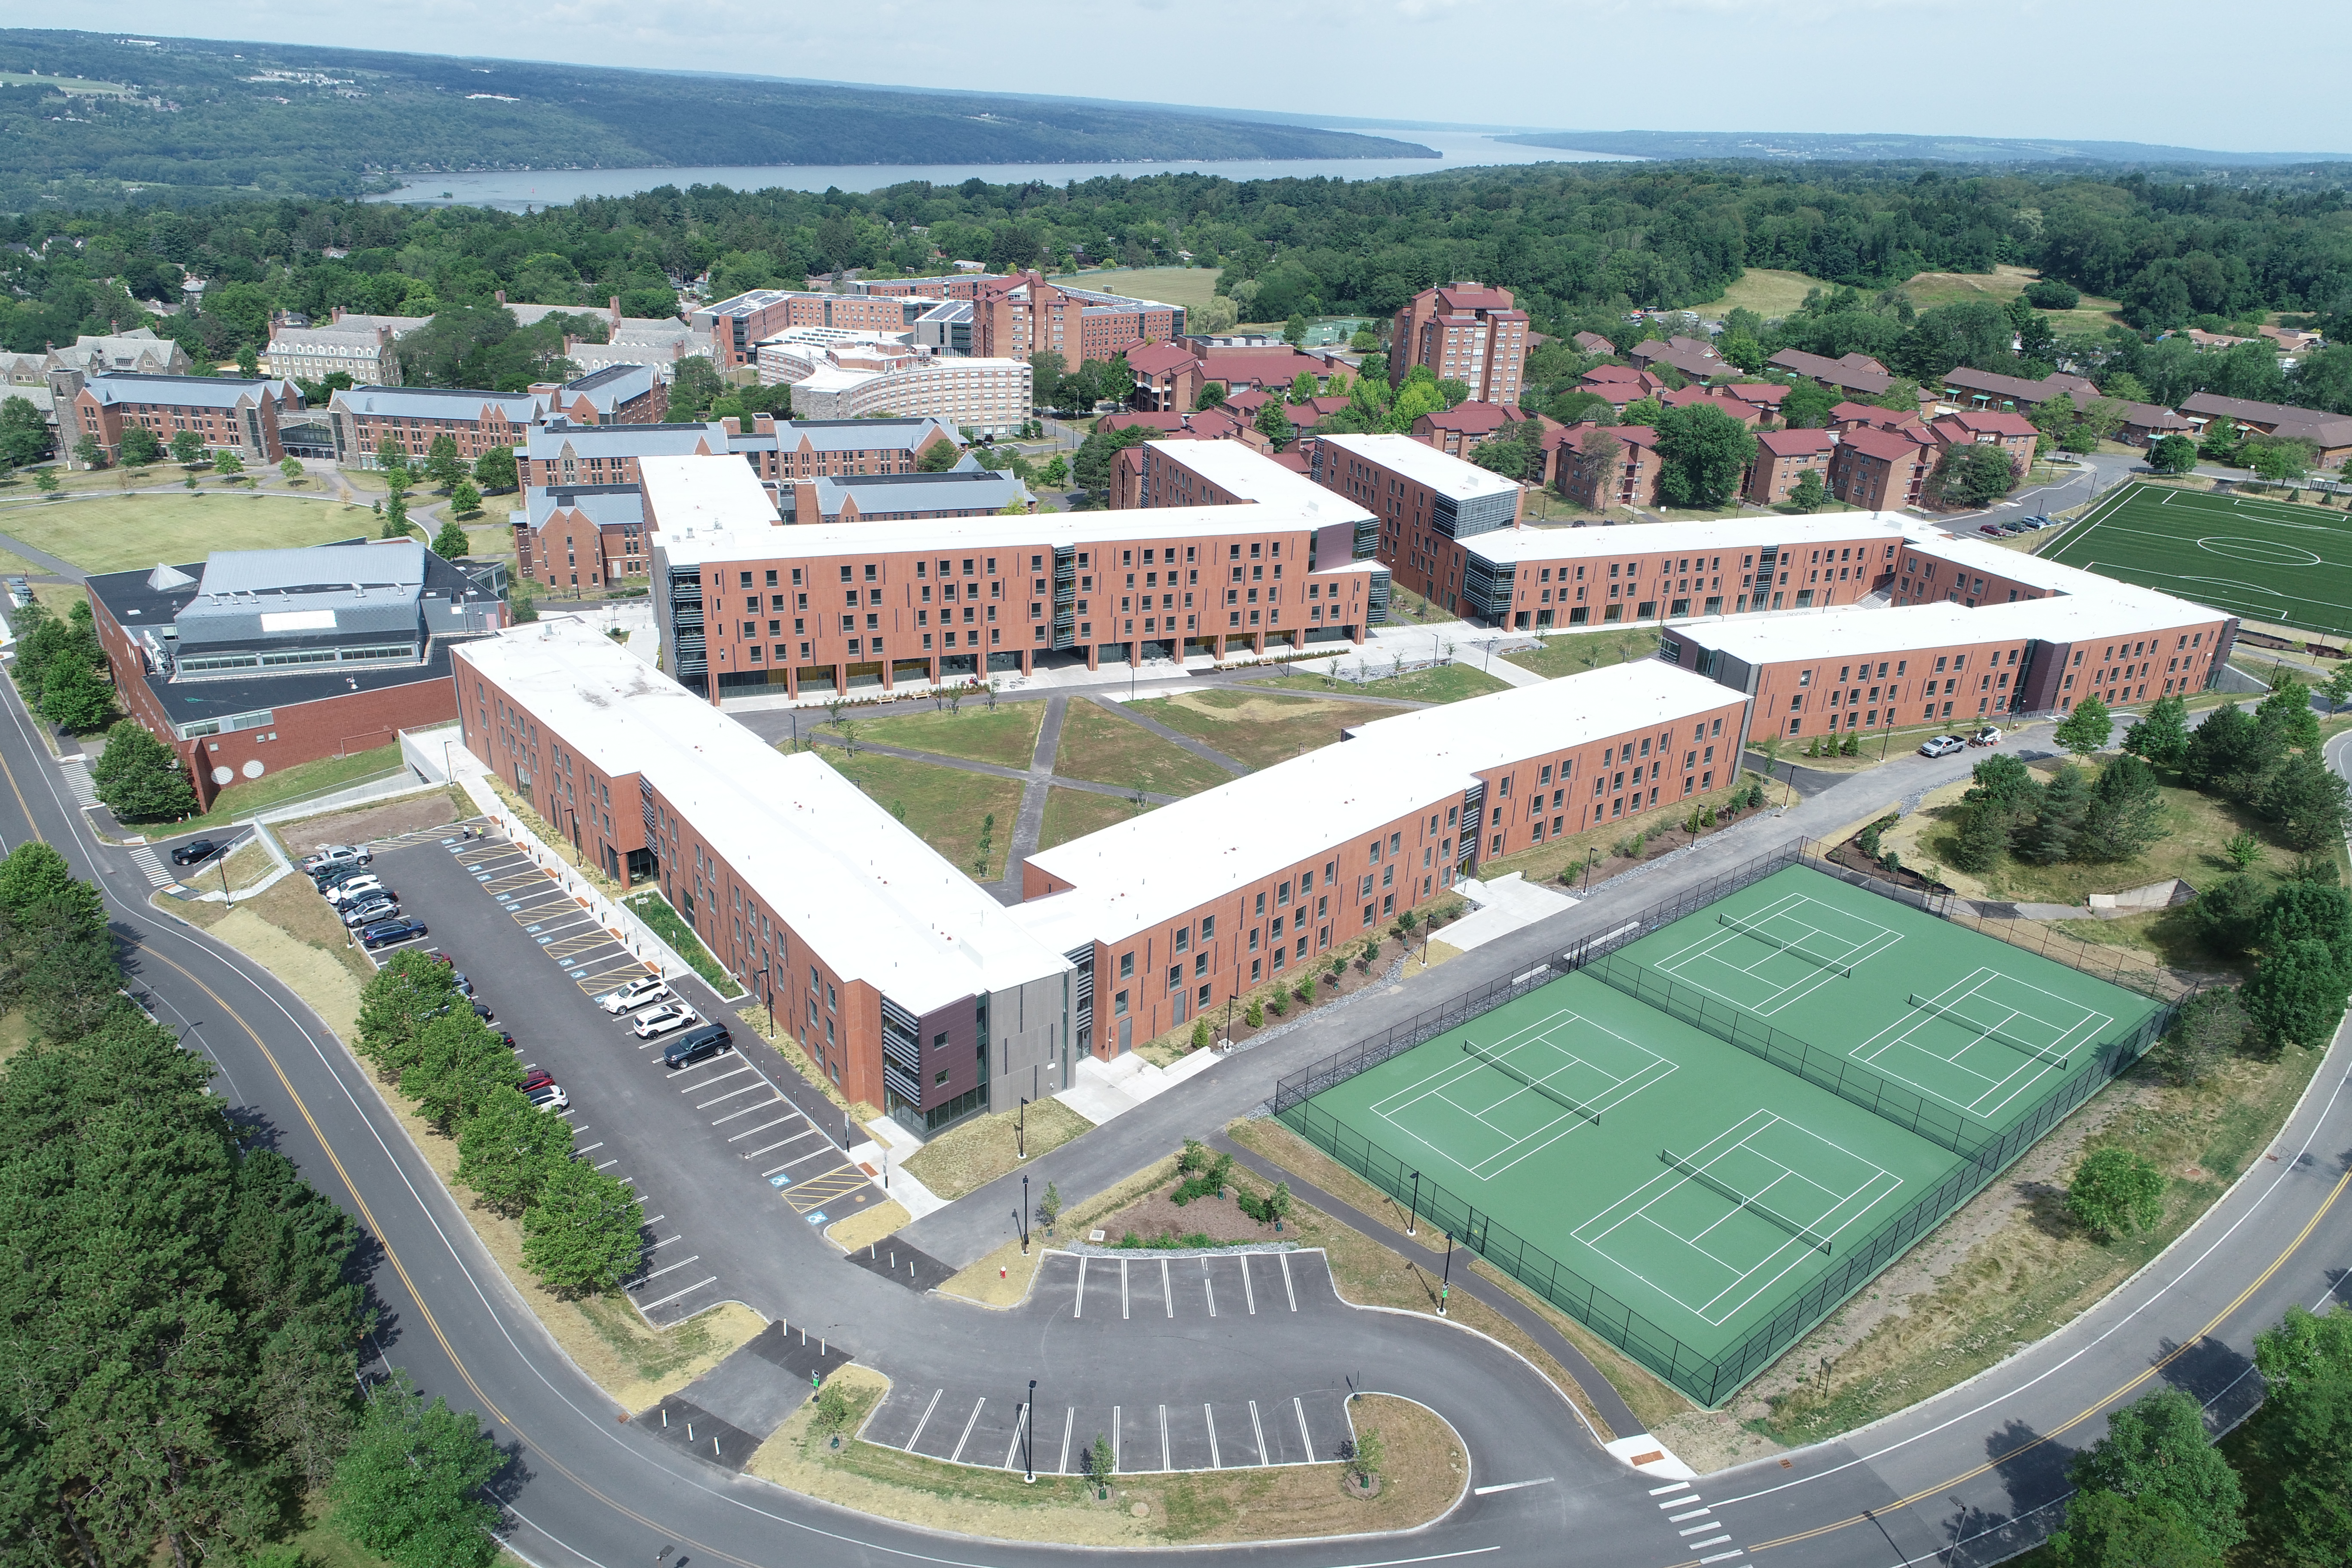 Aerial photo of the NCRE, including the turf field.